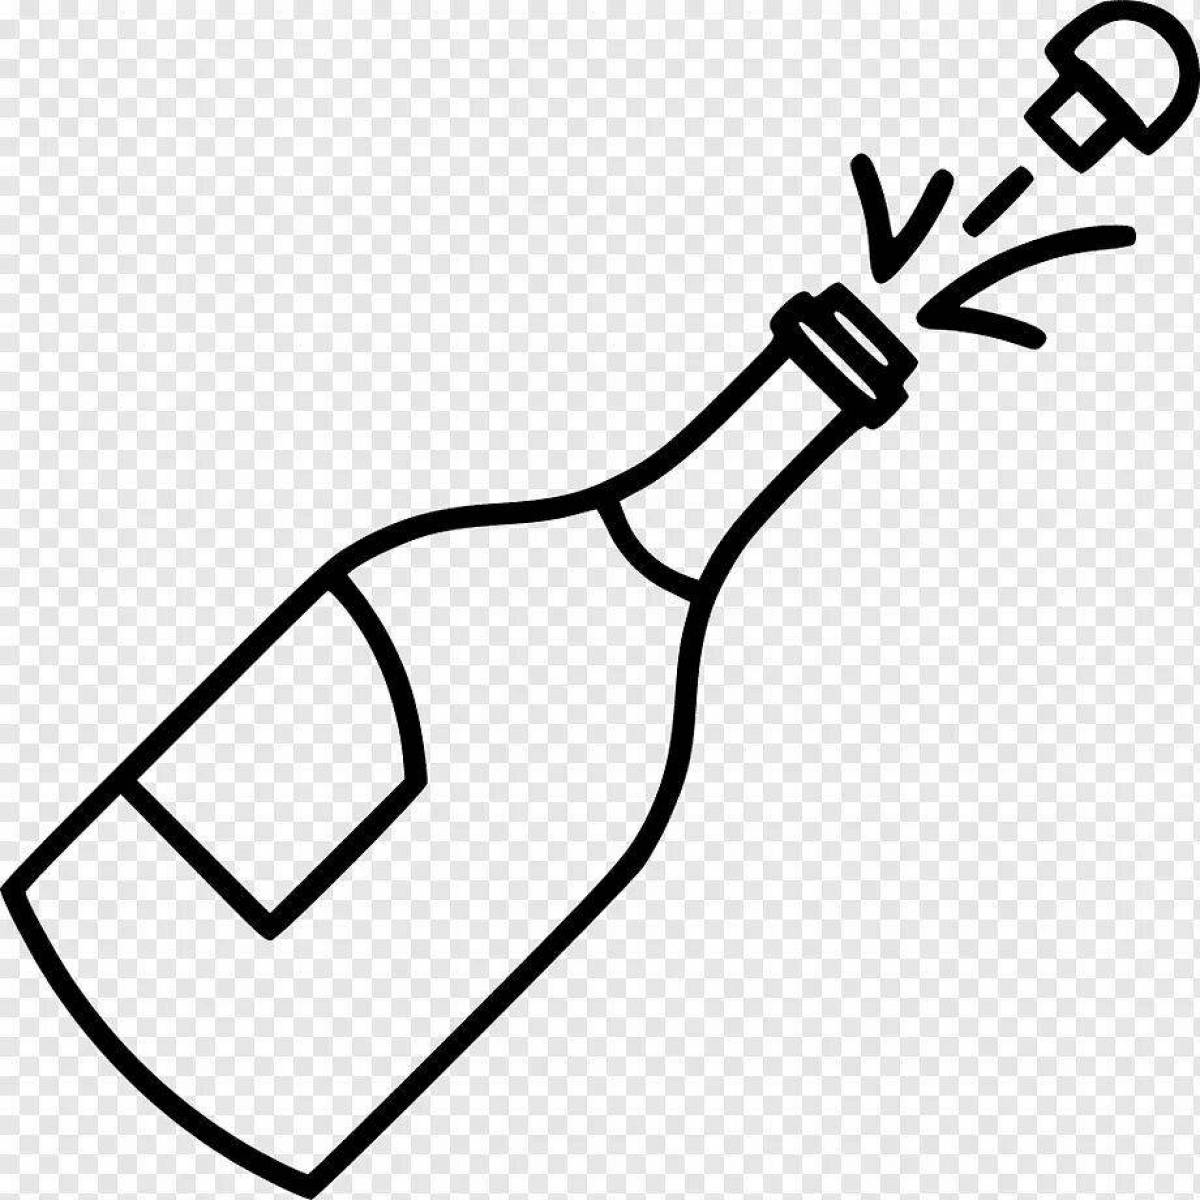 Shine champagne bottle coloring book